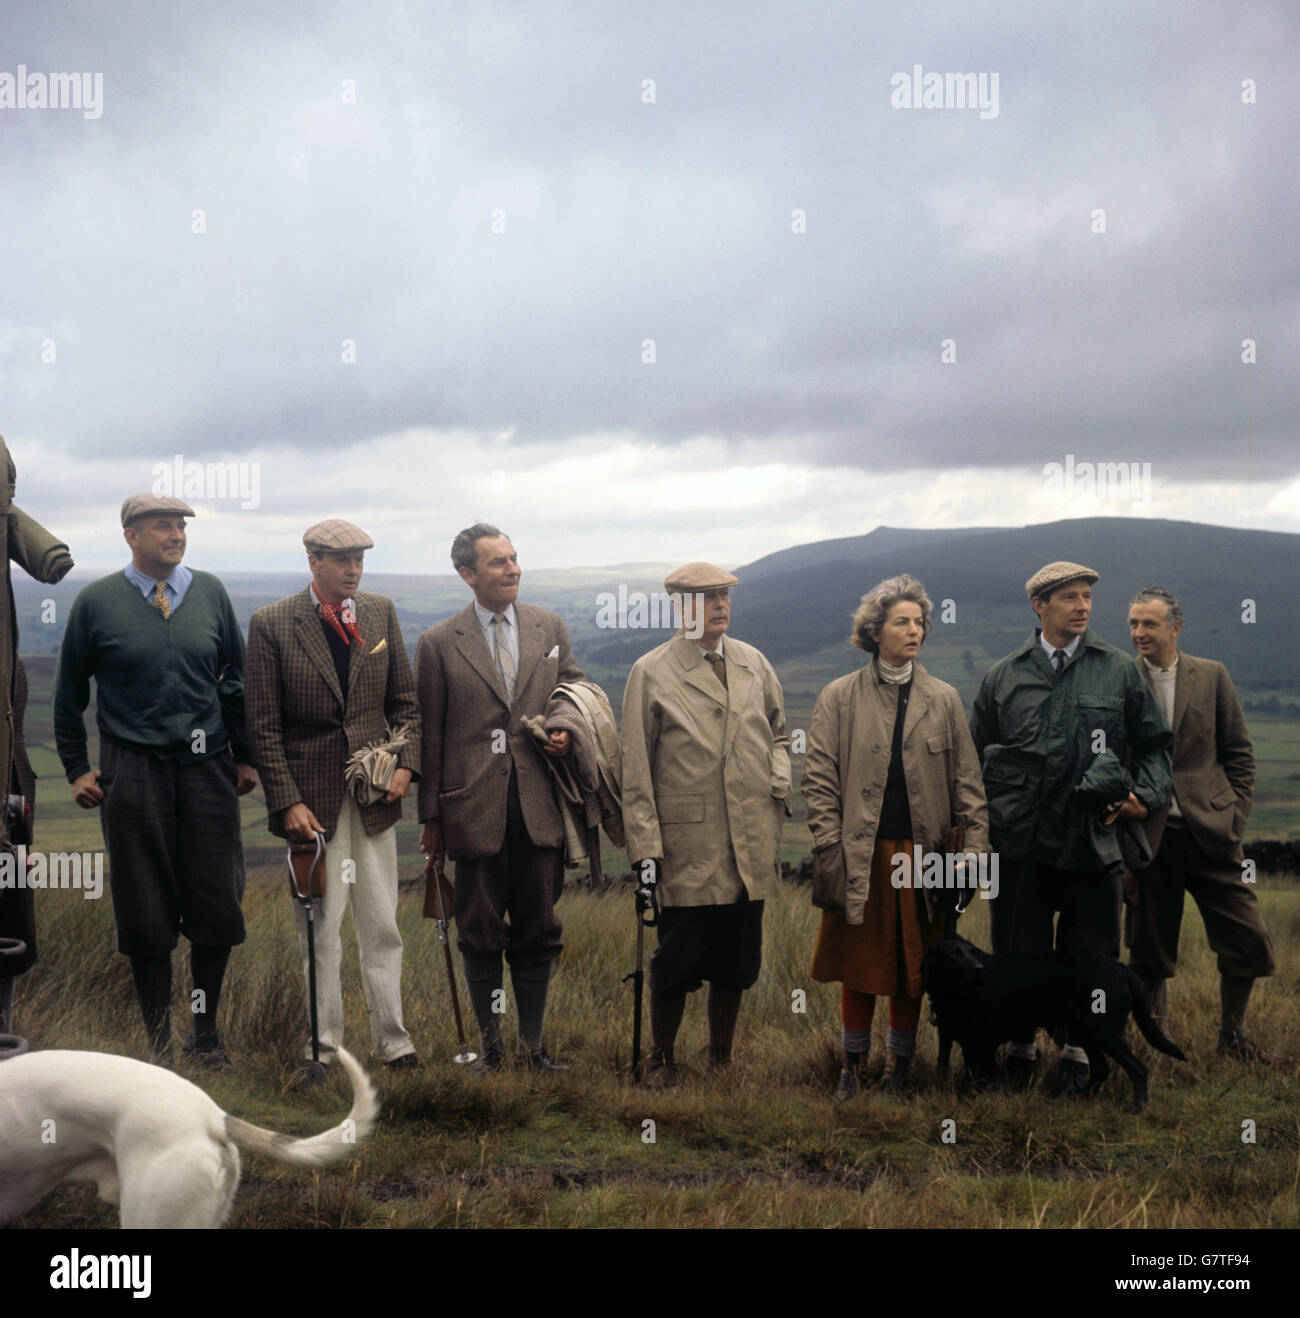 Mr. Harold Macmillan (c) is pictured with other members of the party during the first days grouse shooting, near Bolton Abbey. Left to right: unknown, The Duke Of Devonshire; the Prime minister's nephew; Mr. Hugh Fraser, Secretary of State for Air; The Prime Minister; the Duchess of Devonshire, and Sir David Ormsby-Gore. Stock Photo